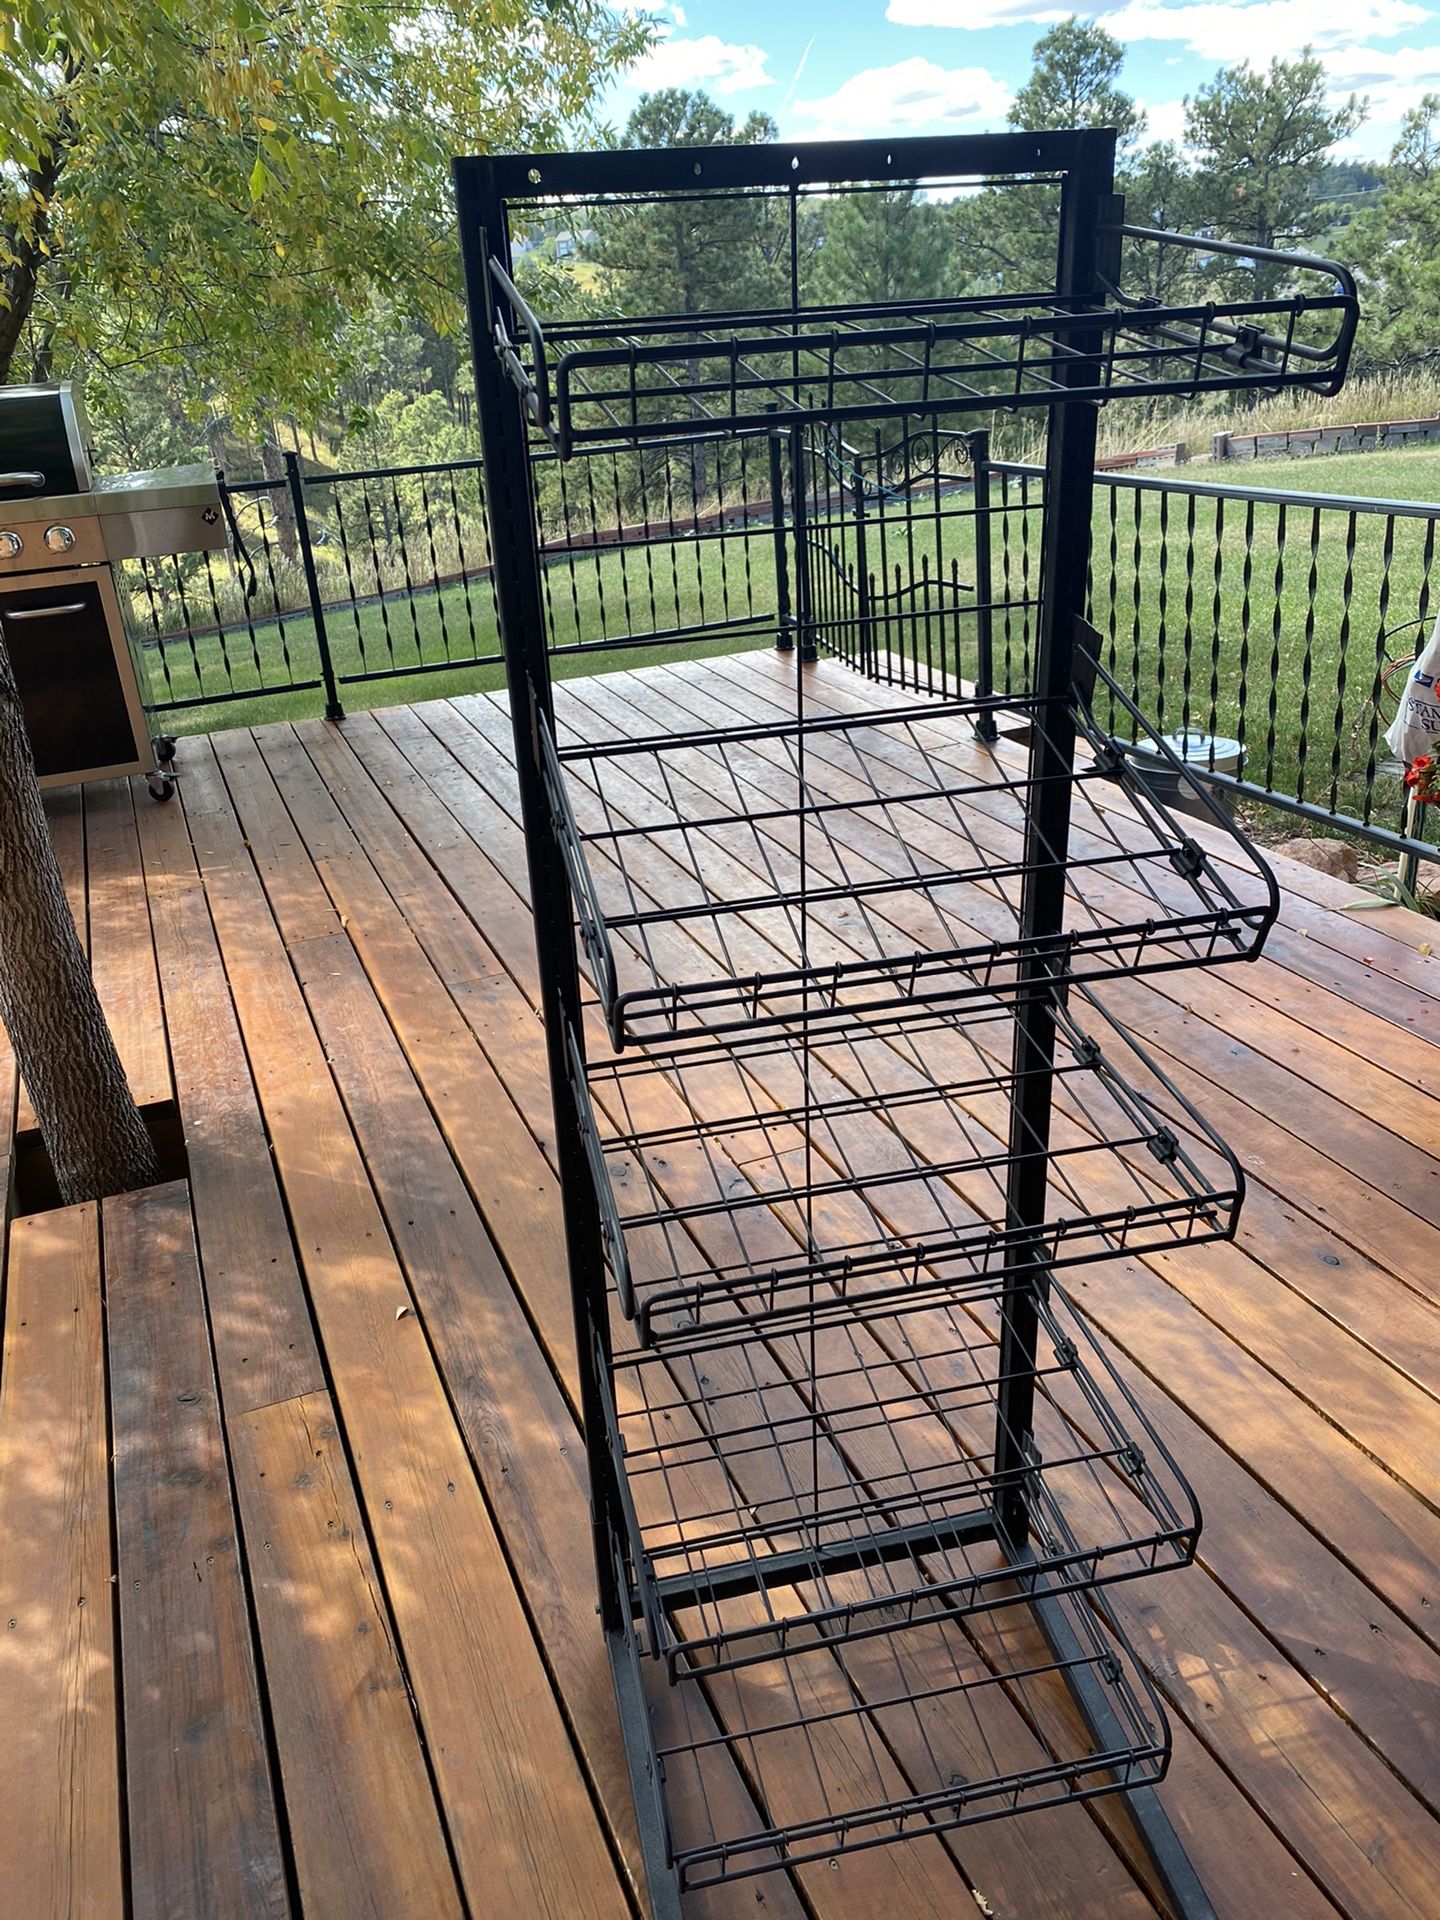 they call it “impulse buy shelving” but versatile for many uses    Steel shelves all adjustable up and down and hang level or straight or forward tilt